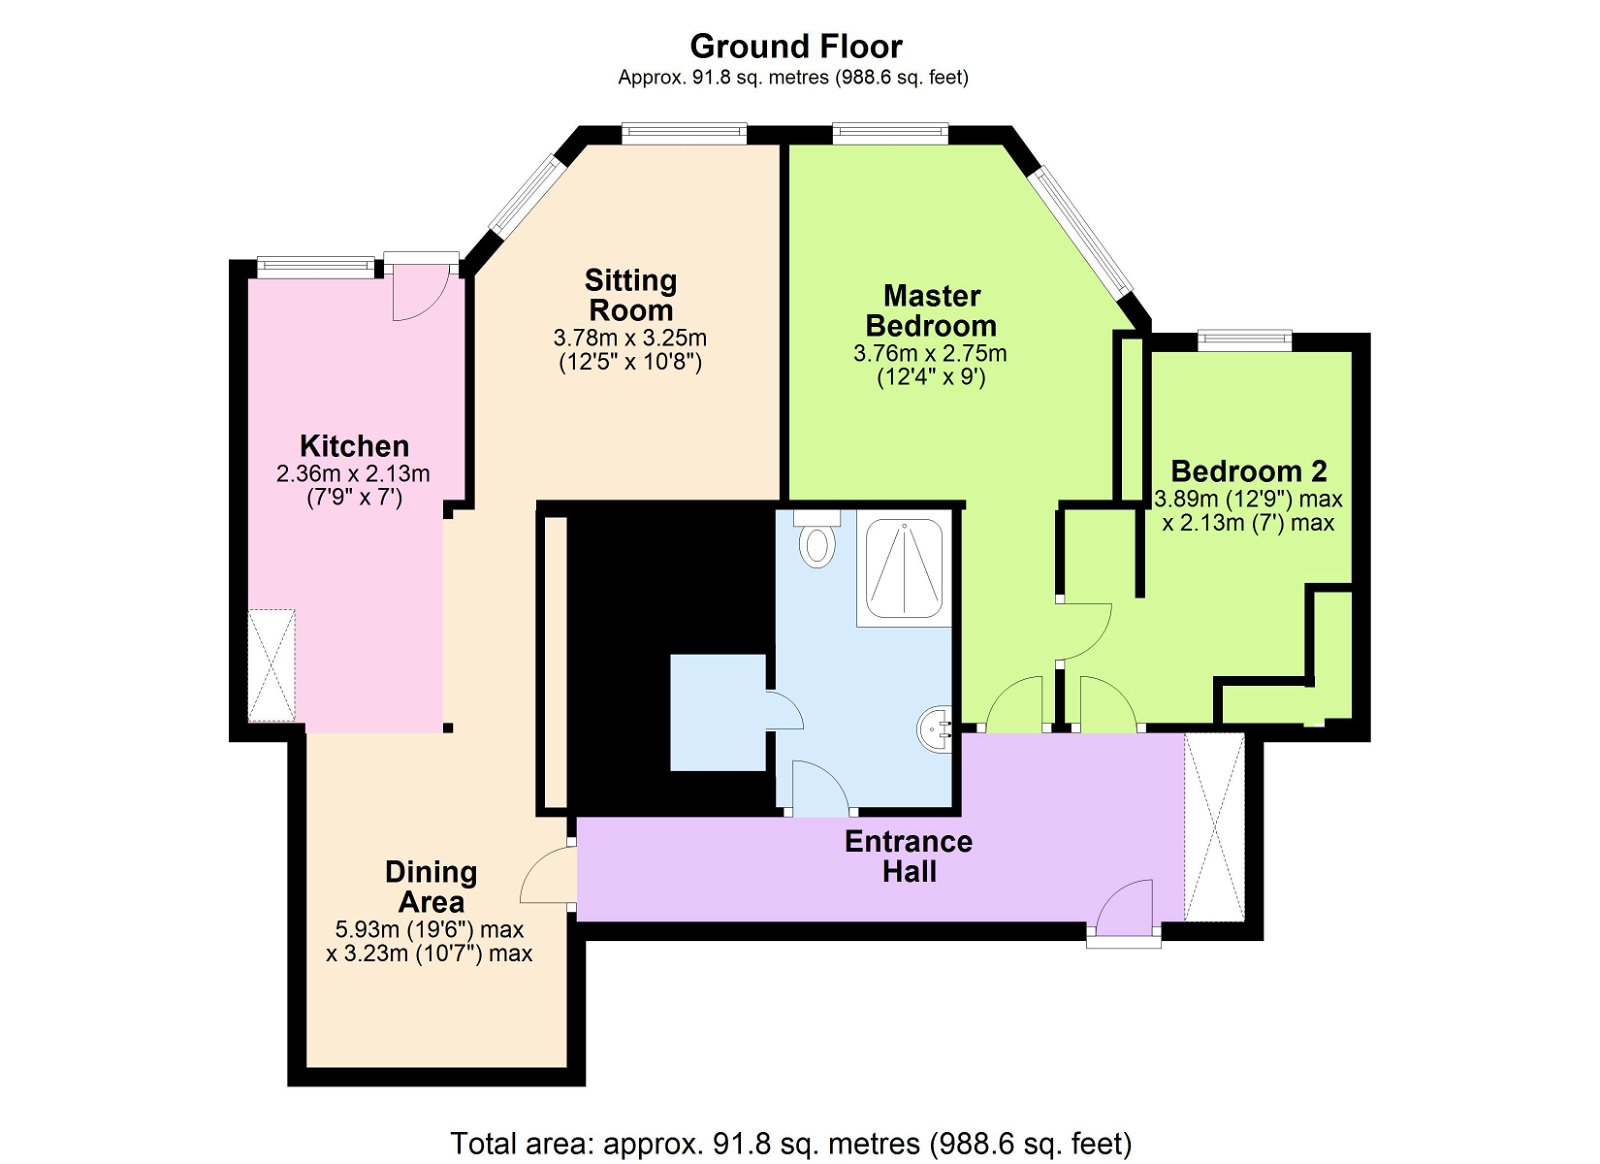 Floorplans For A Ground Floor Flat in A Historic Building in Sedlescombe